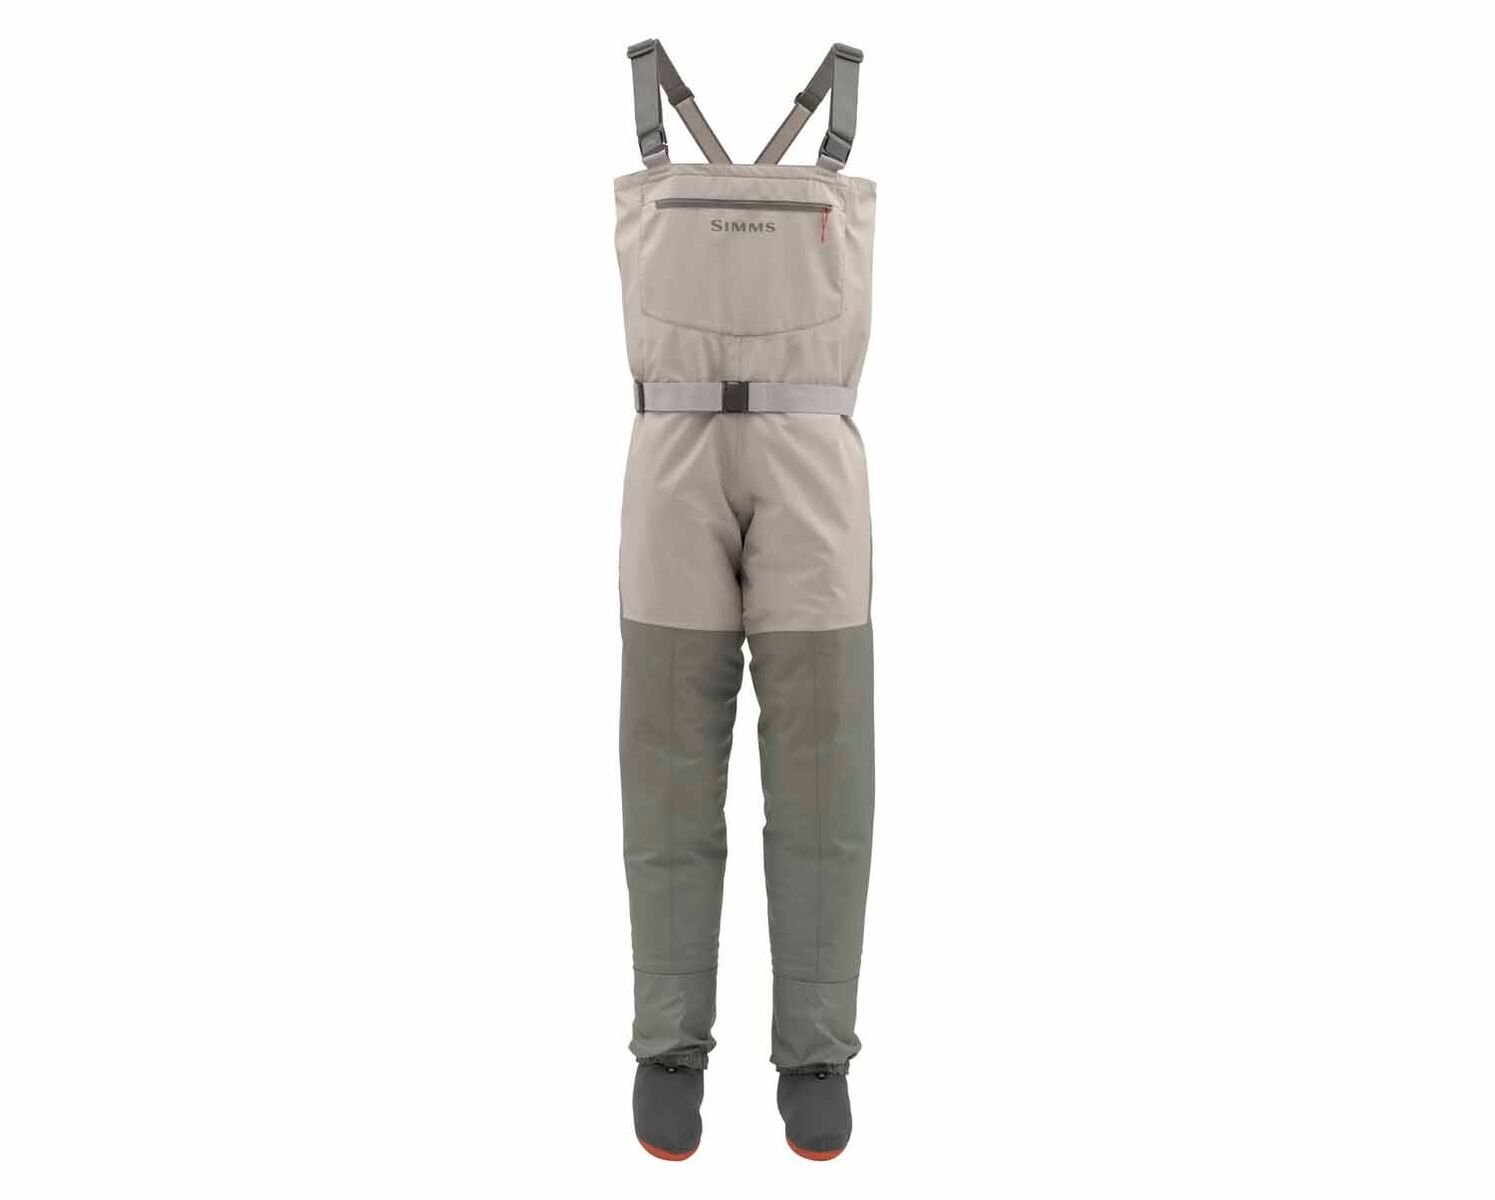 Kontrovers ribben politik SALE! Simms Women's Tributary Waders - Platinum Color — Rogue Valley Anglers